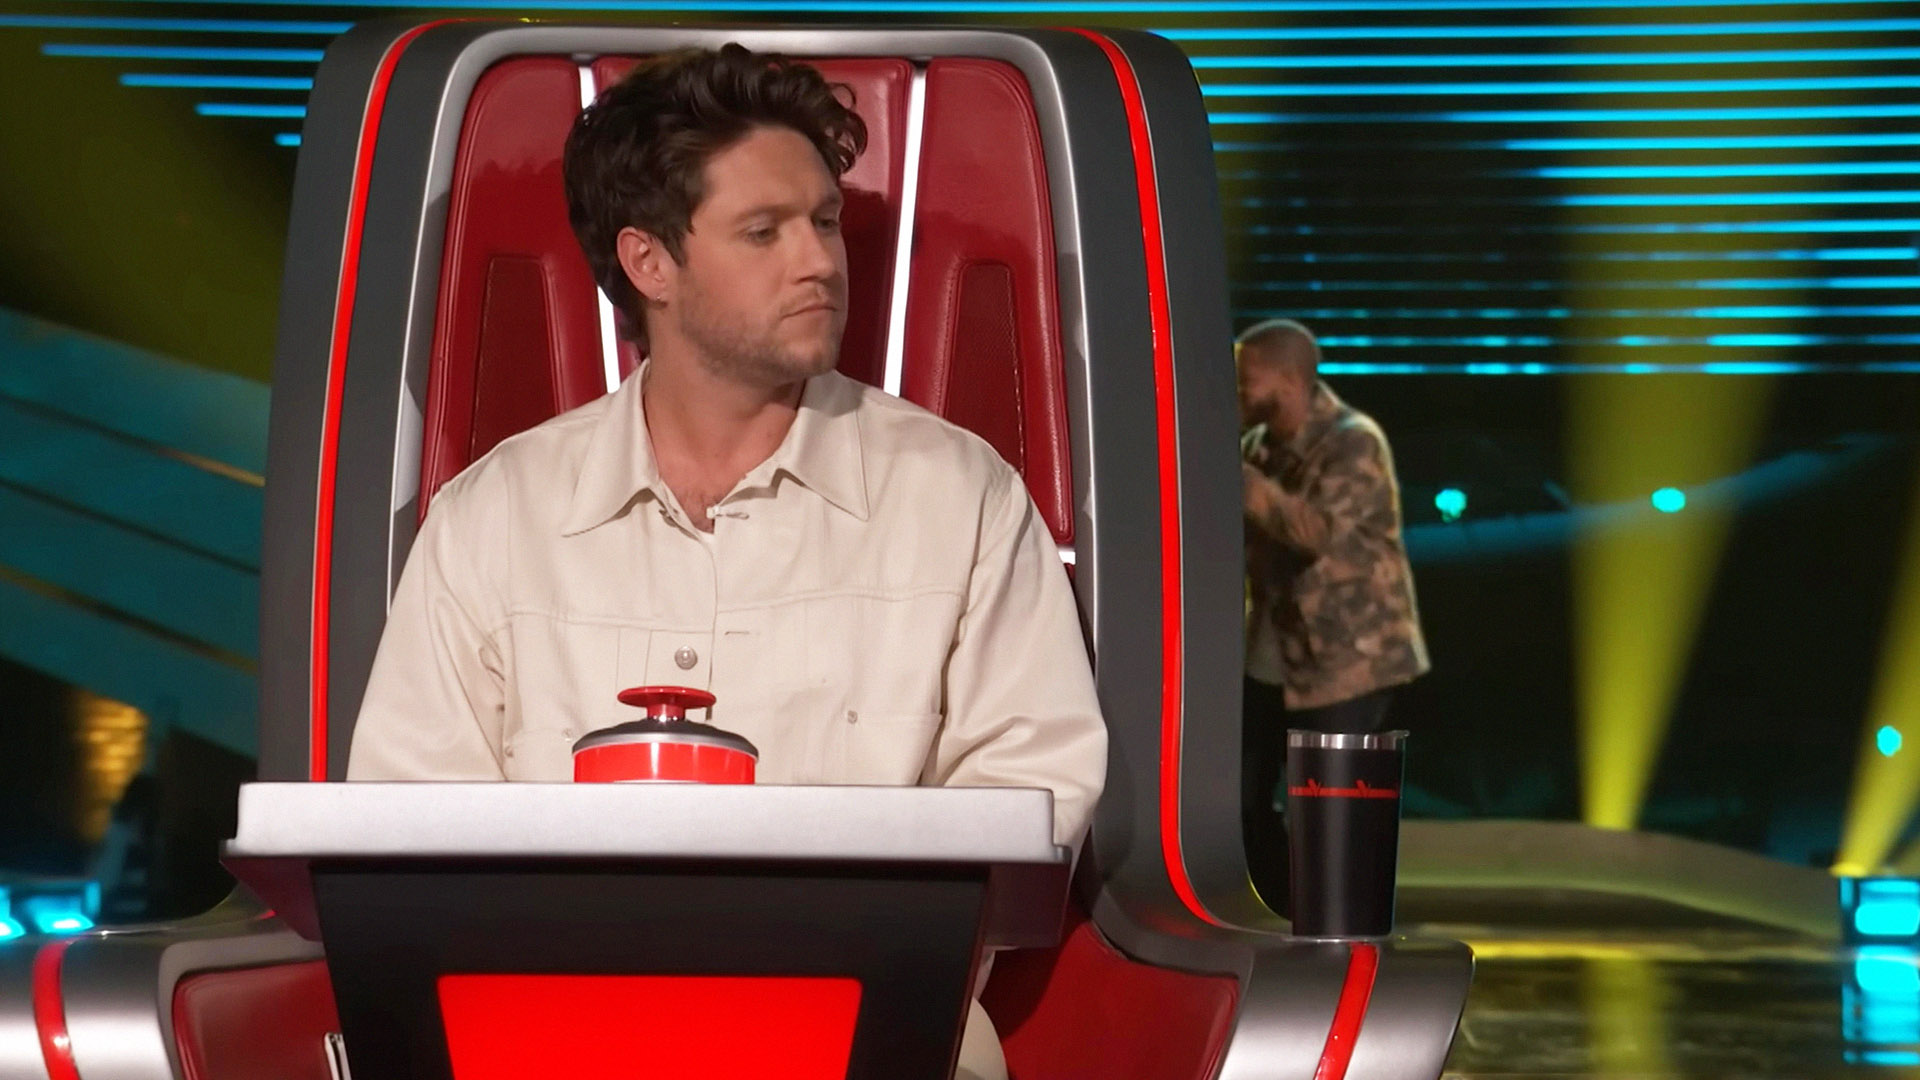 The Voice Contestant Who Got No Chair Turns Last Year Nails Season 24 Audition